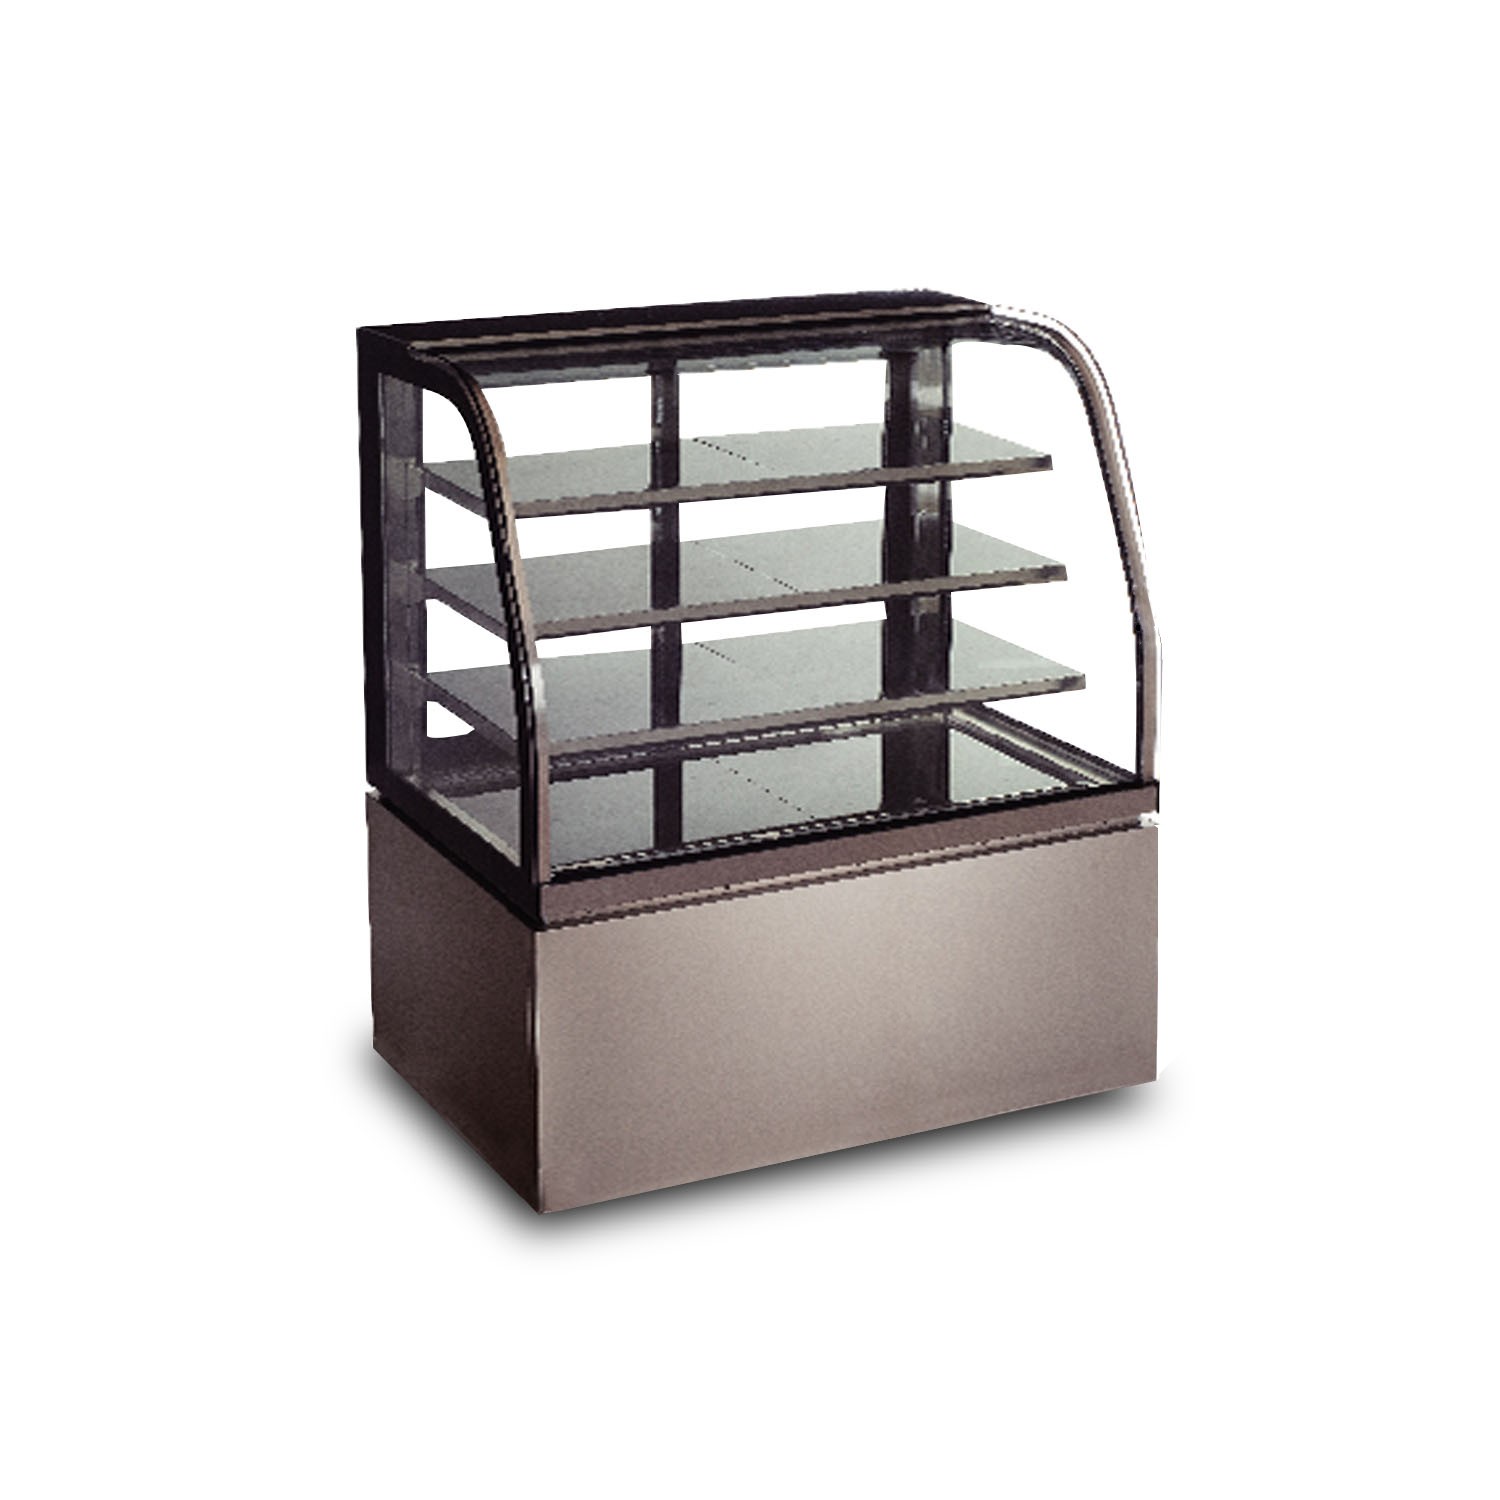 Refrigerated Display Case Mian View